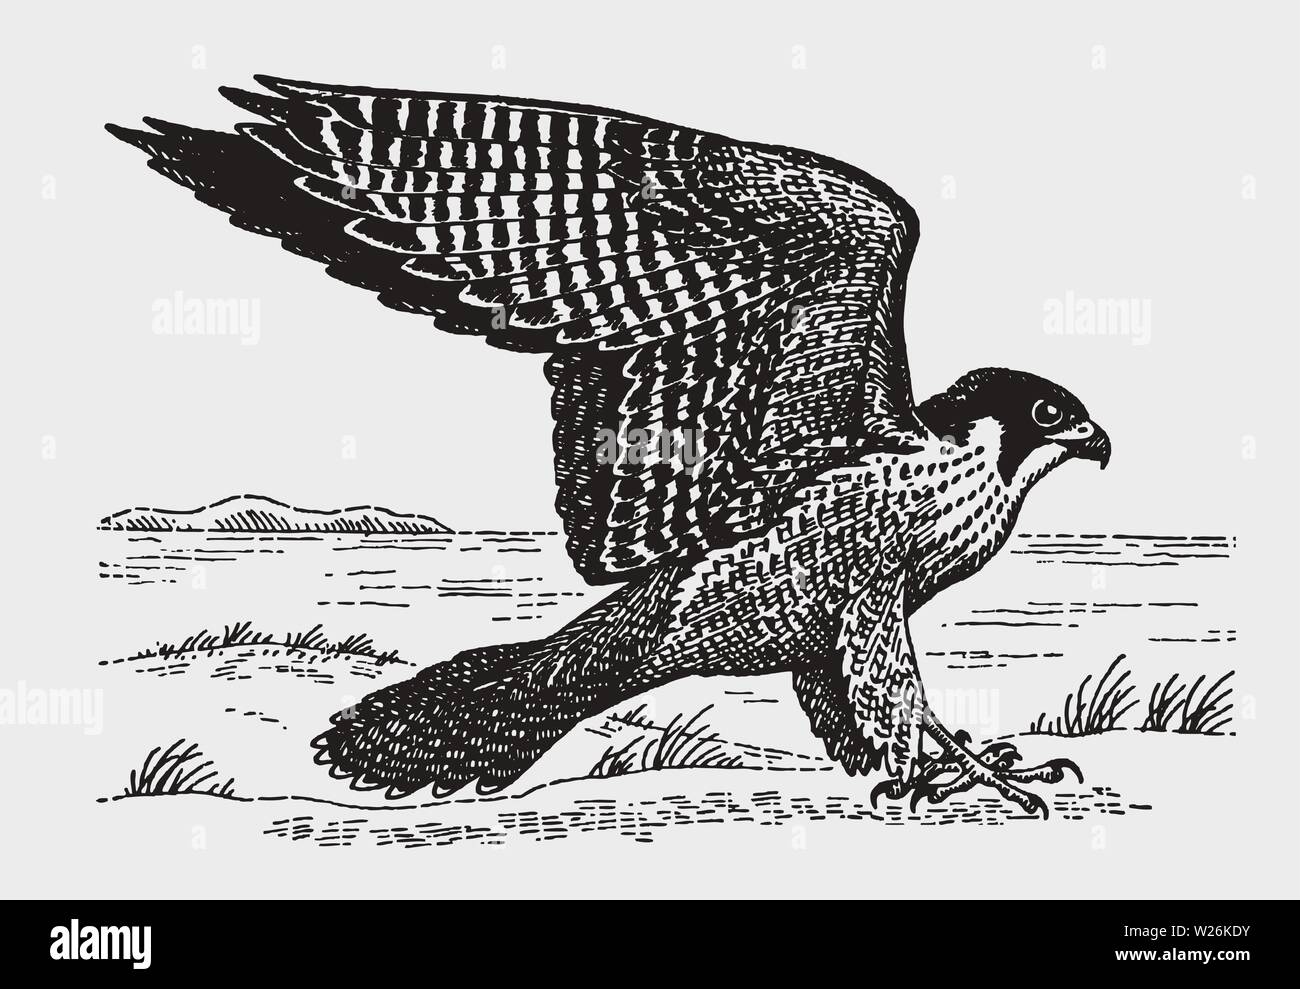 Peregrine falcon (falco peregrinus) sitting on the ground and spreading its wings. Illustration after a historic engraving from the early 20th century Stock Vector